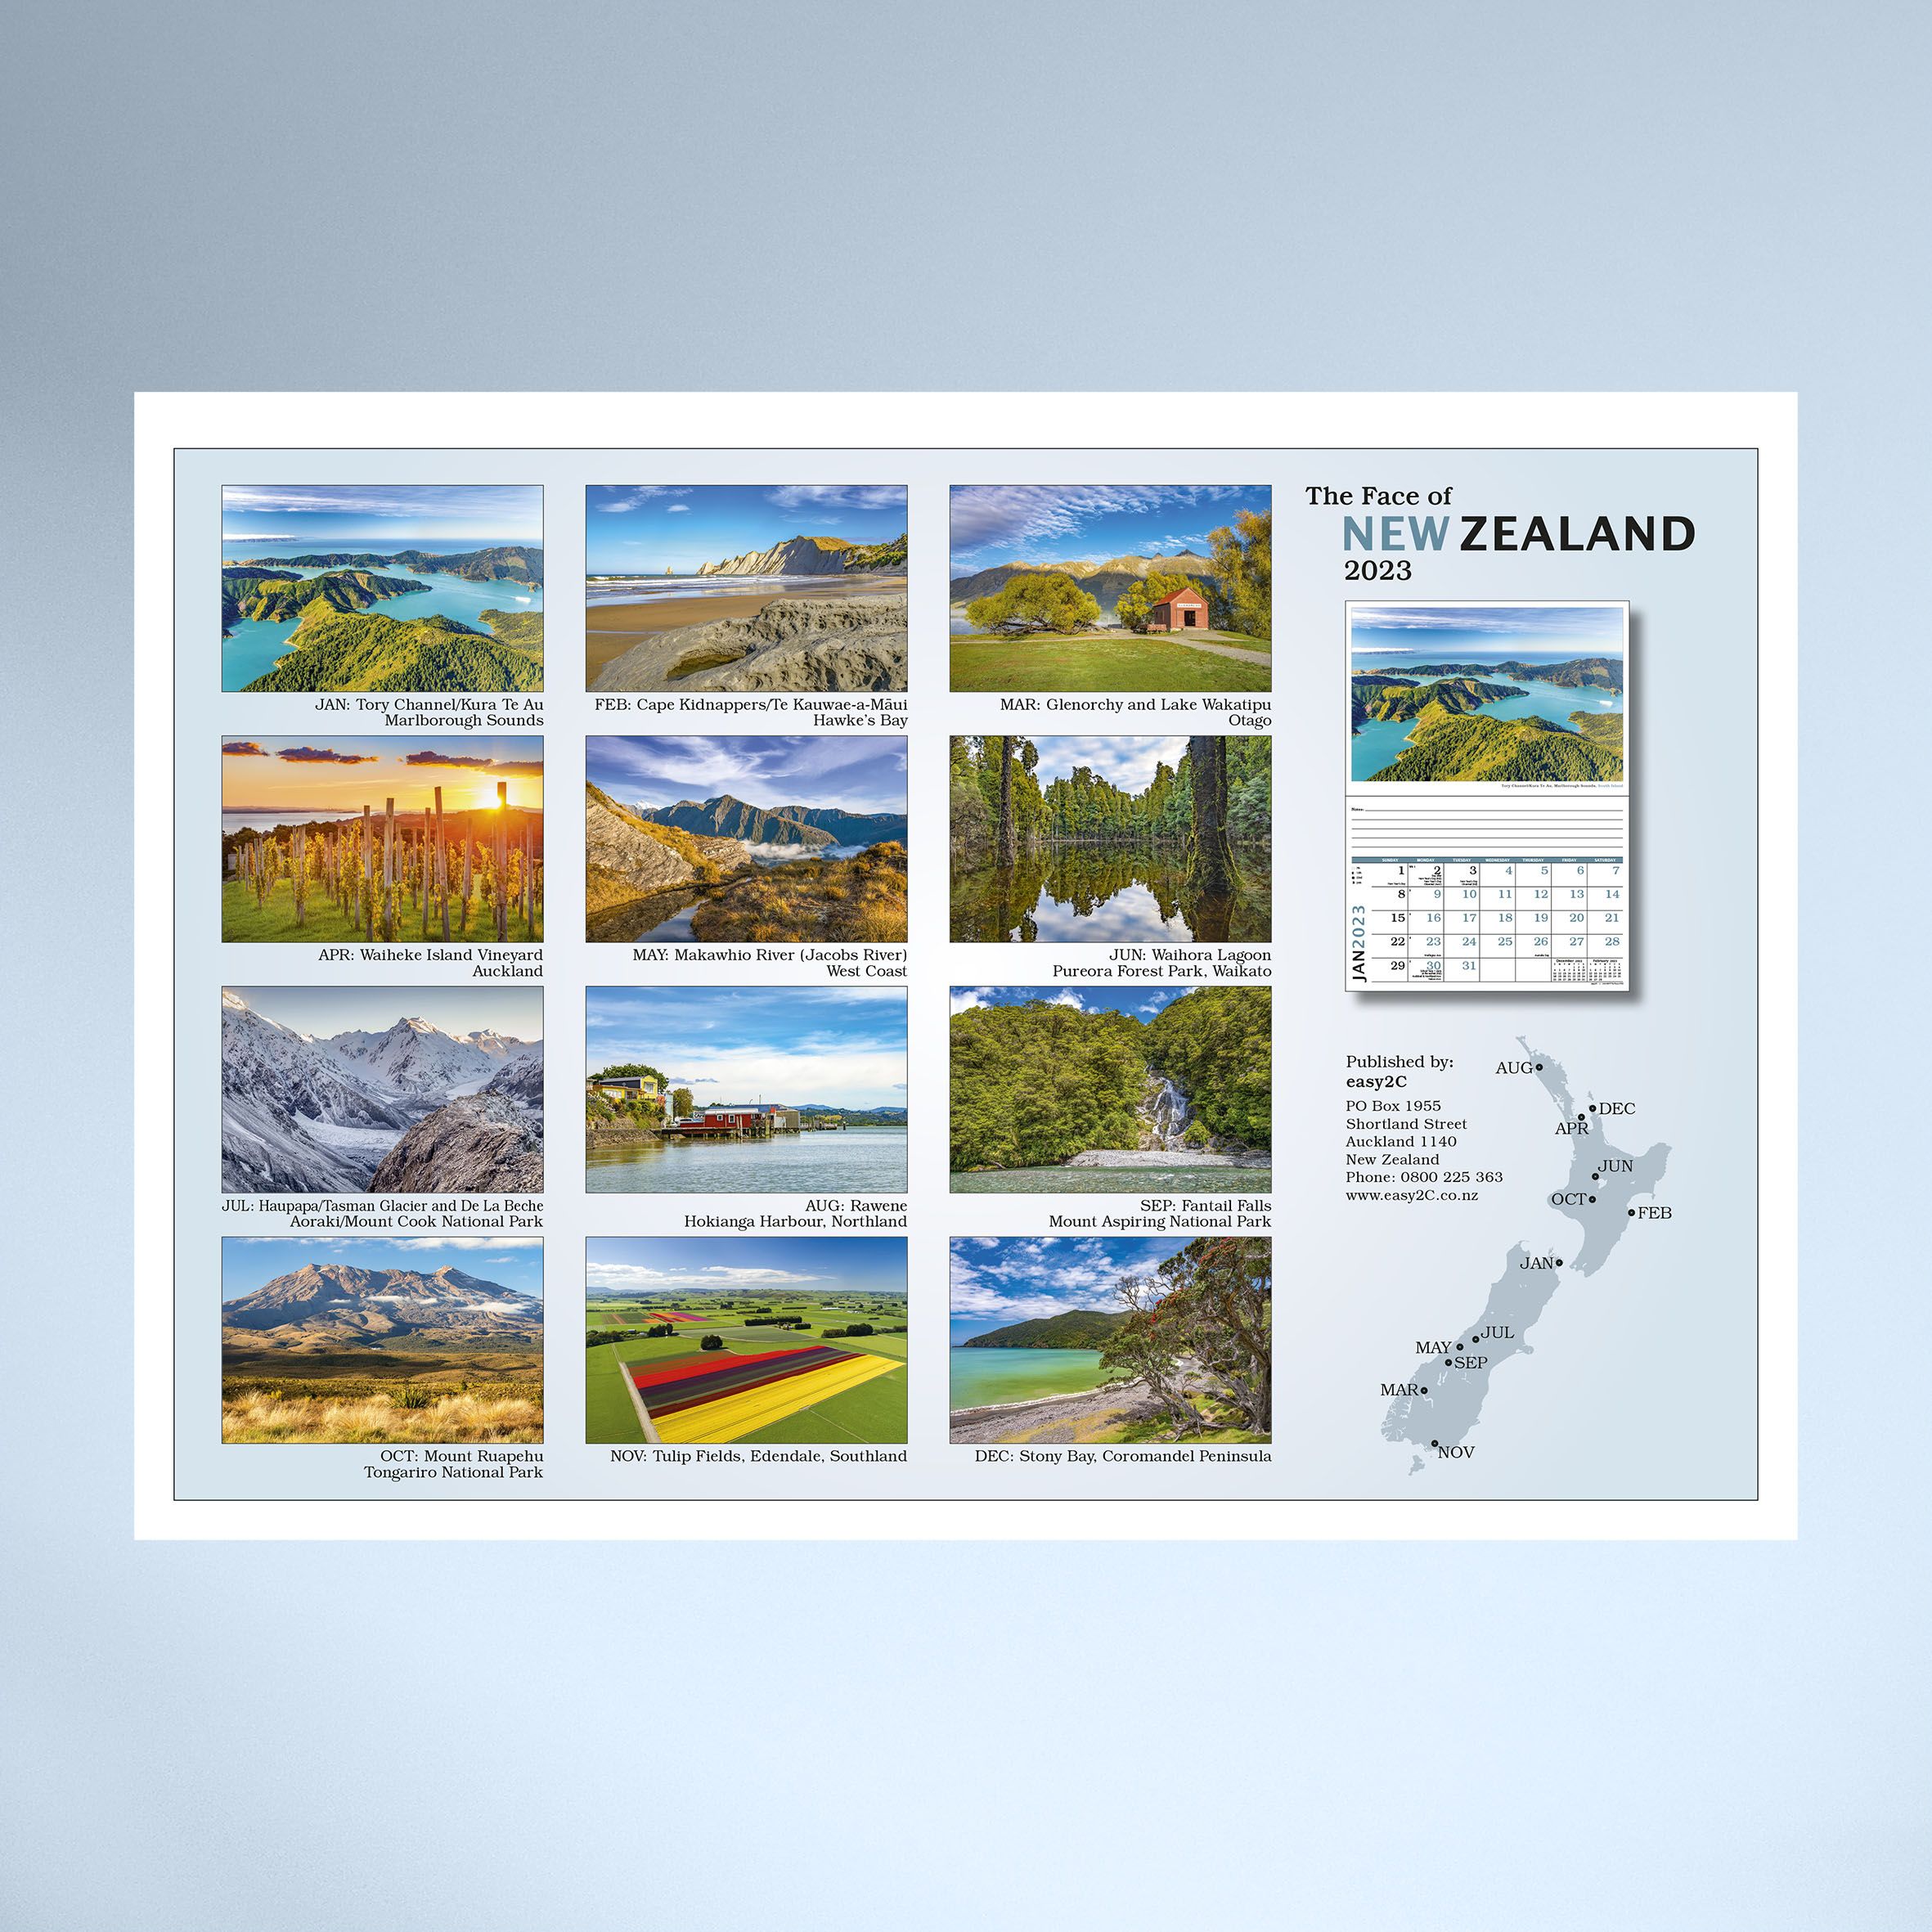 4141_The_Face_of_New_Zealand_Booklet_26